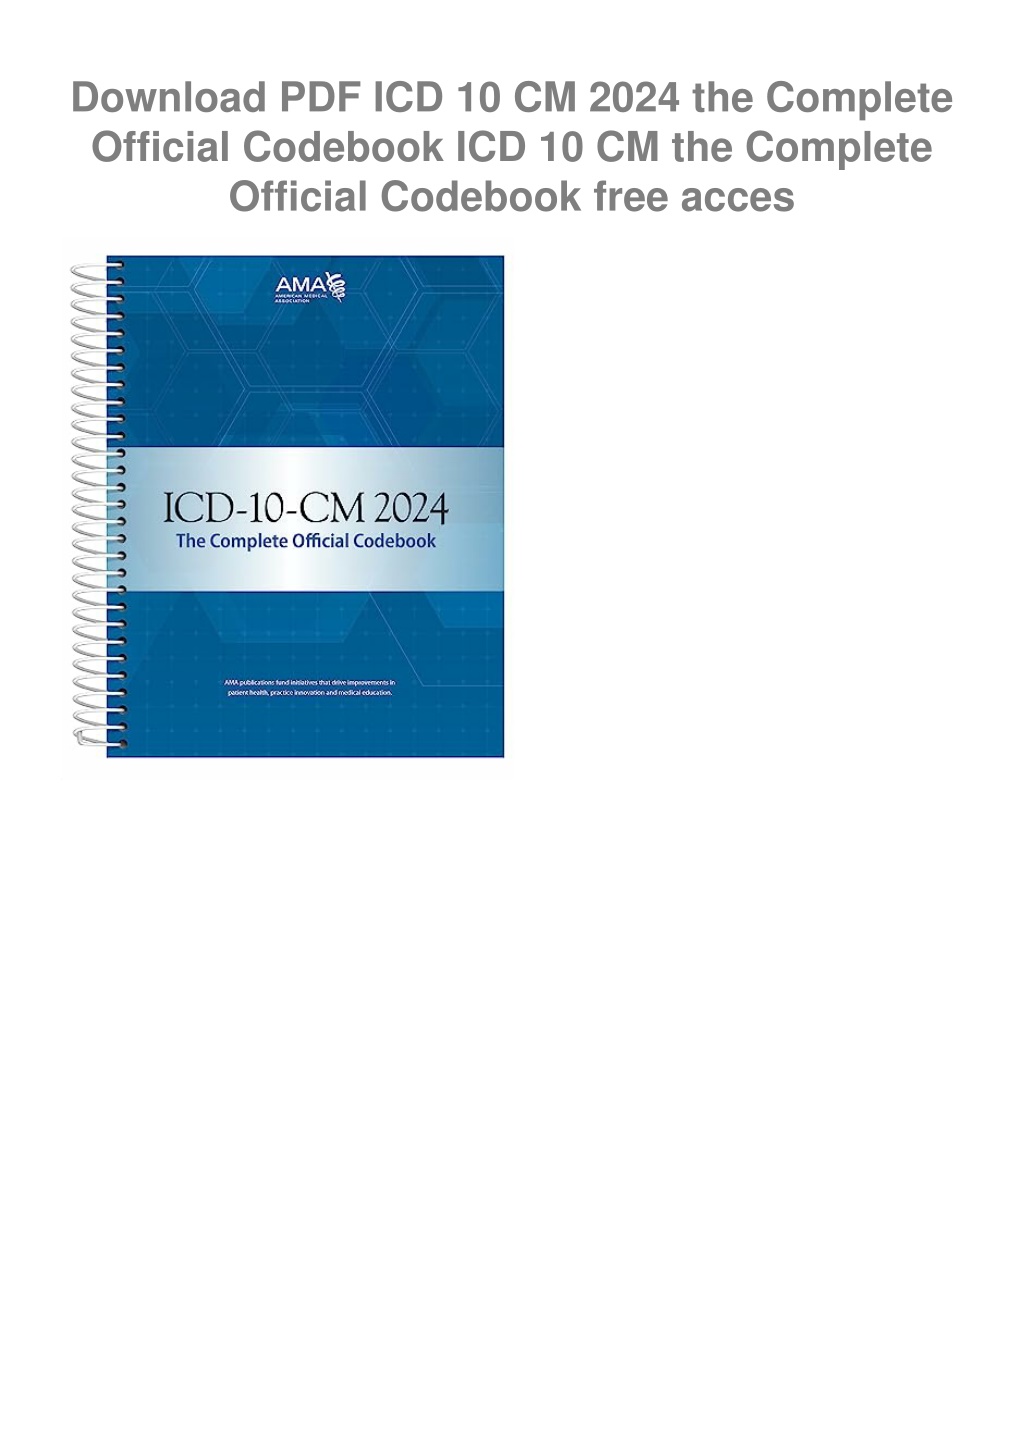 PPT Download PDF ICD 10 CM 2024 the Complete Official Codebook ICD 10